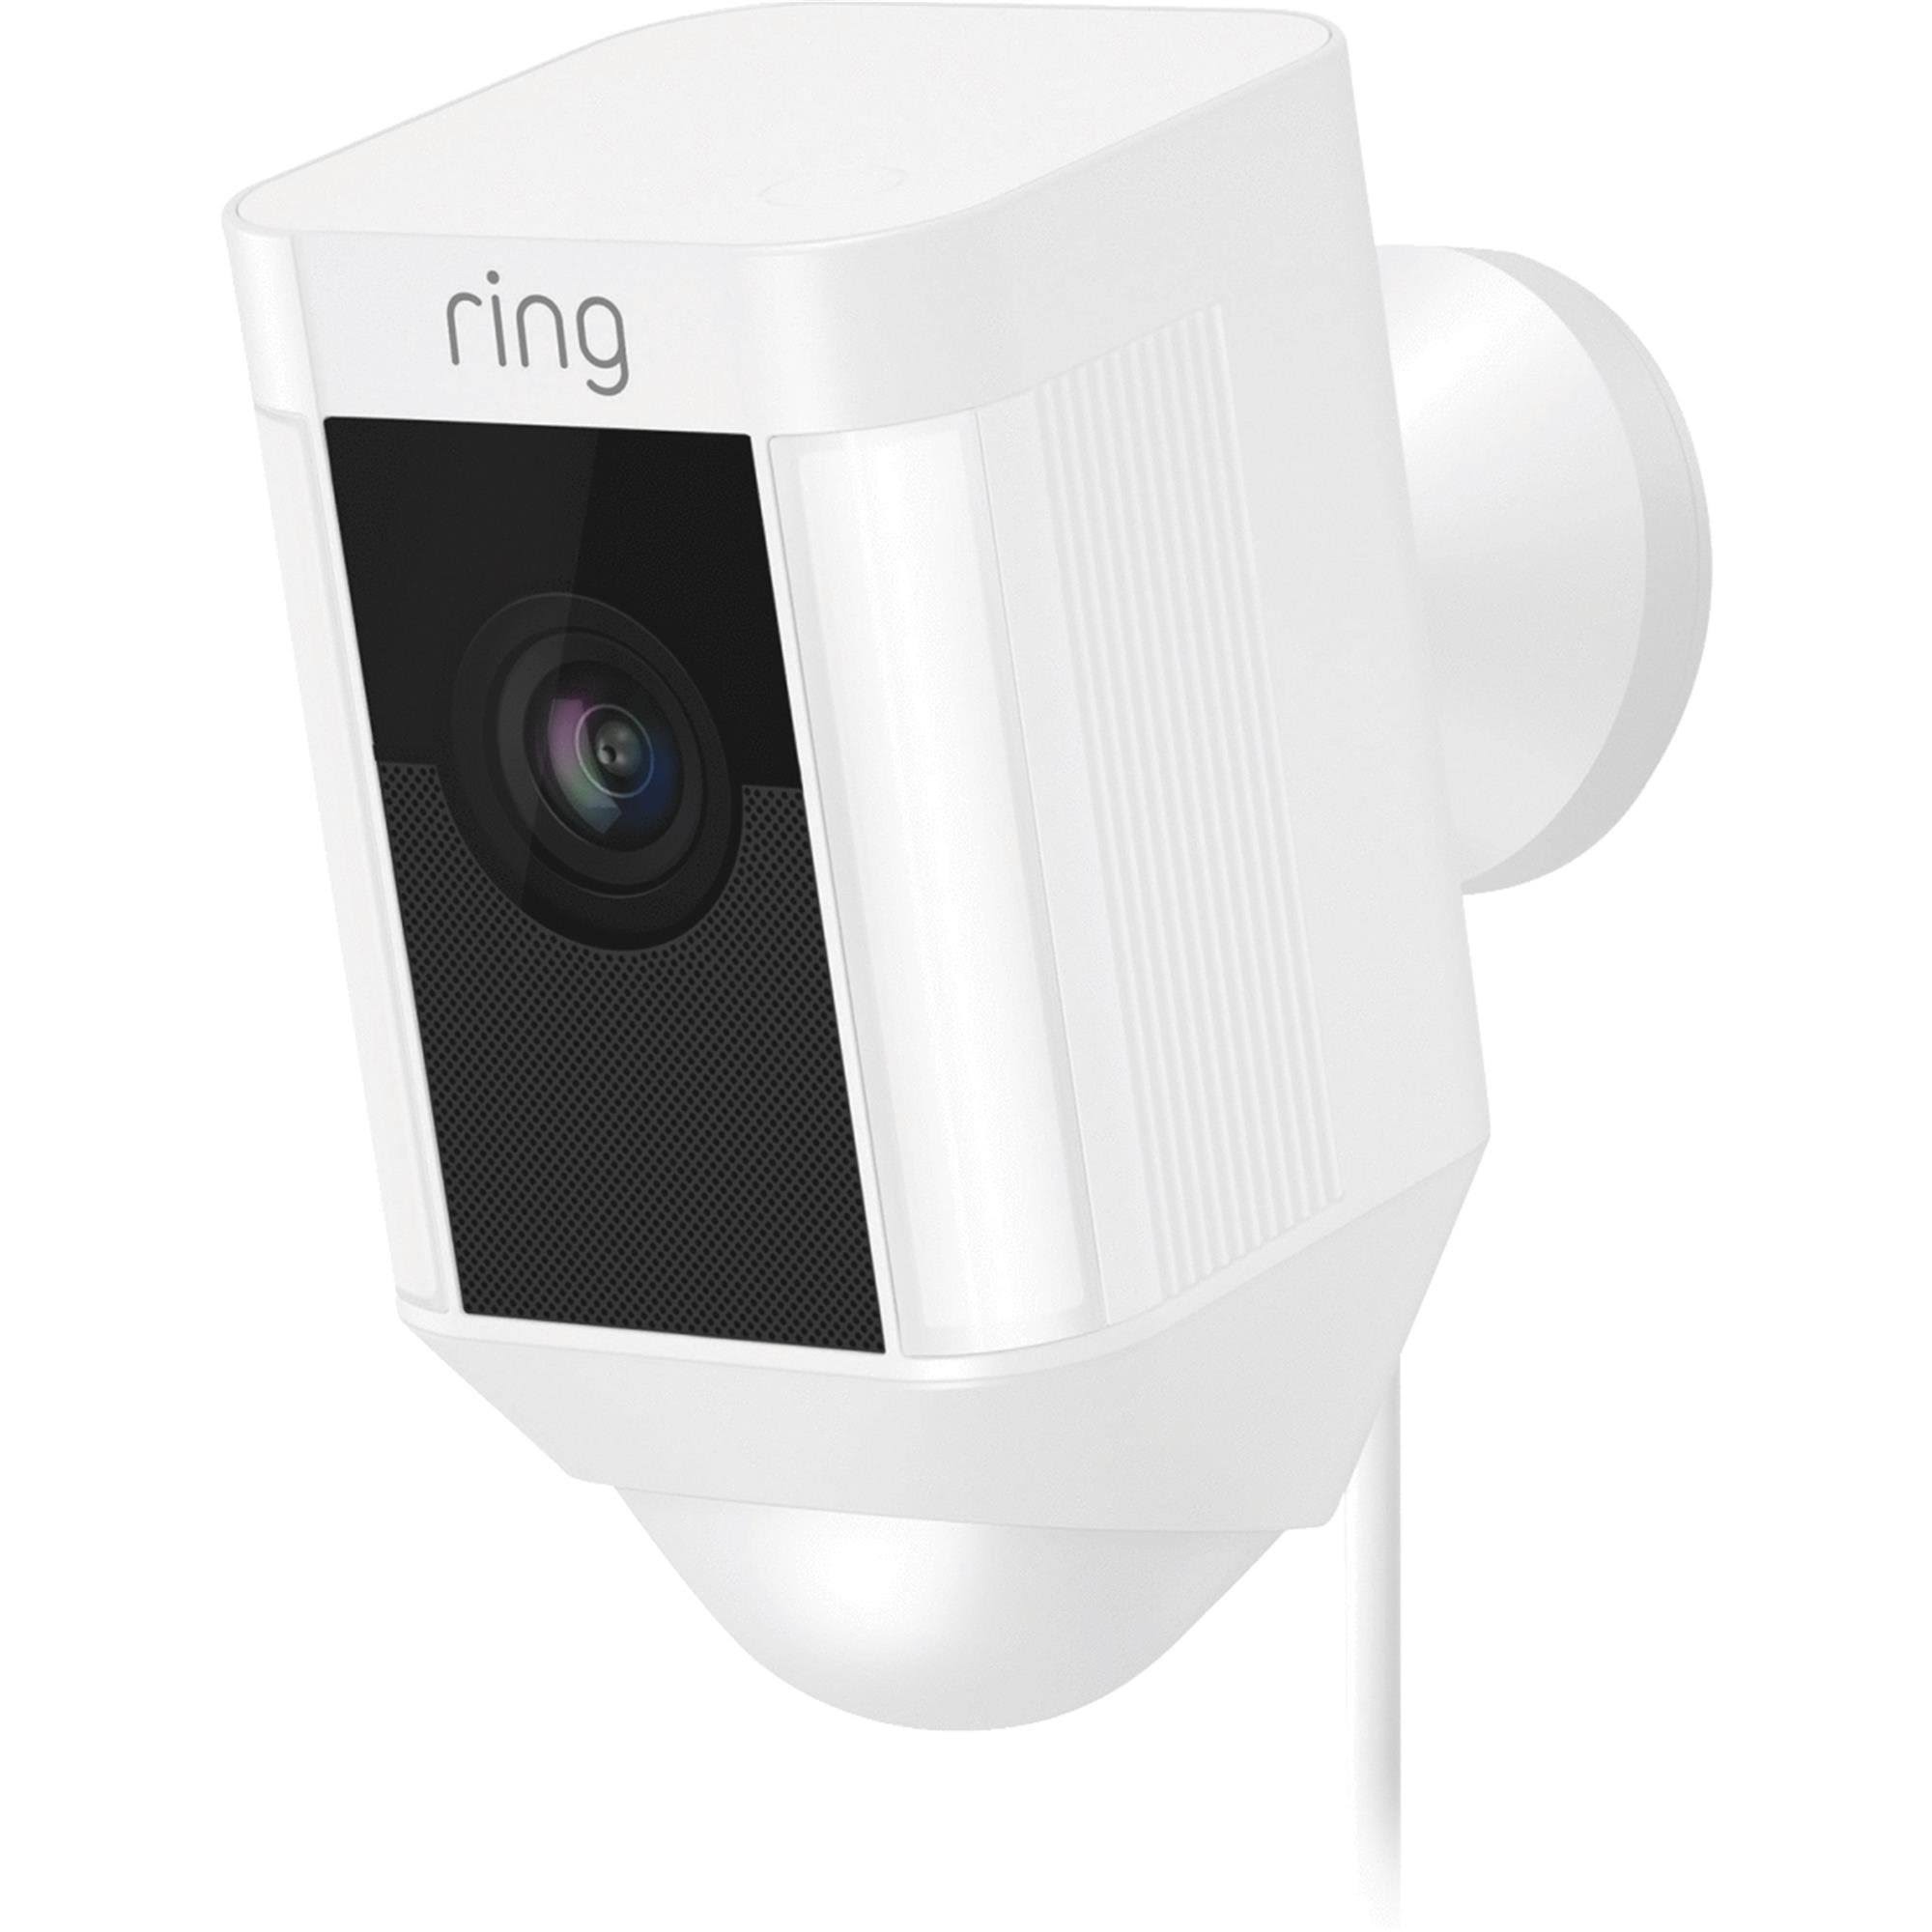 Ring Spotlight Cam Wired Outdoor Security Camera - White, 7.2" x 6.54"